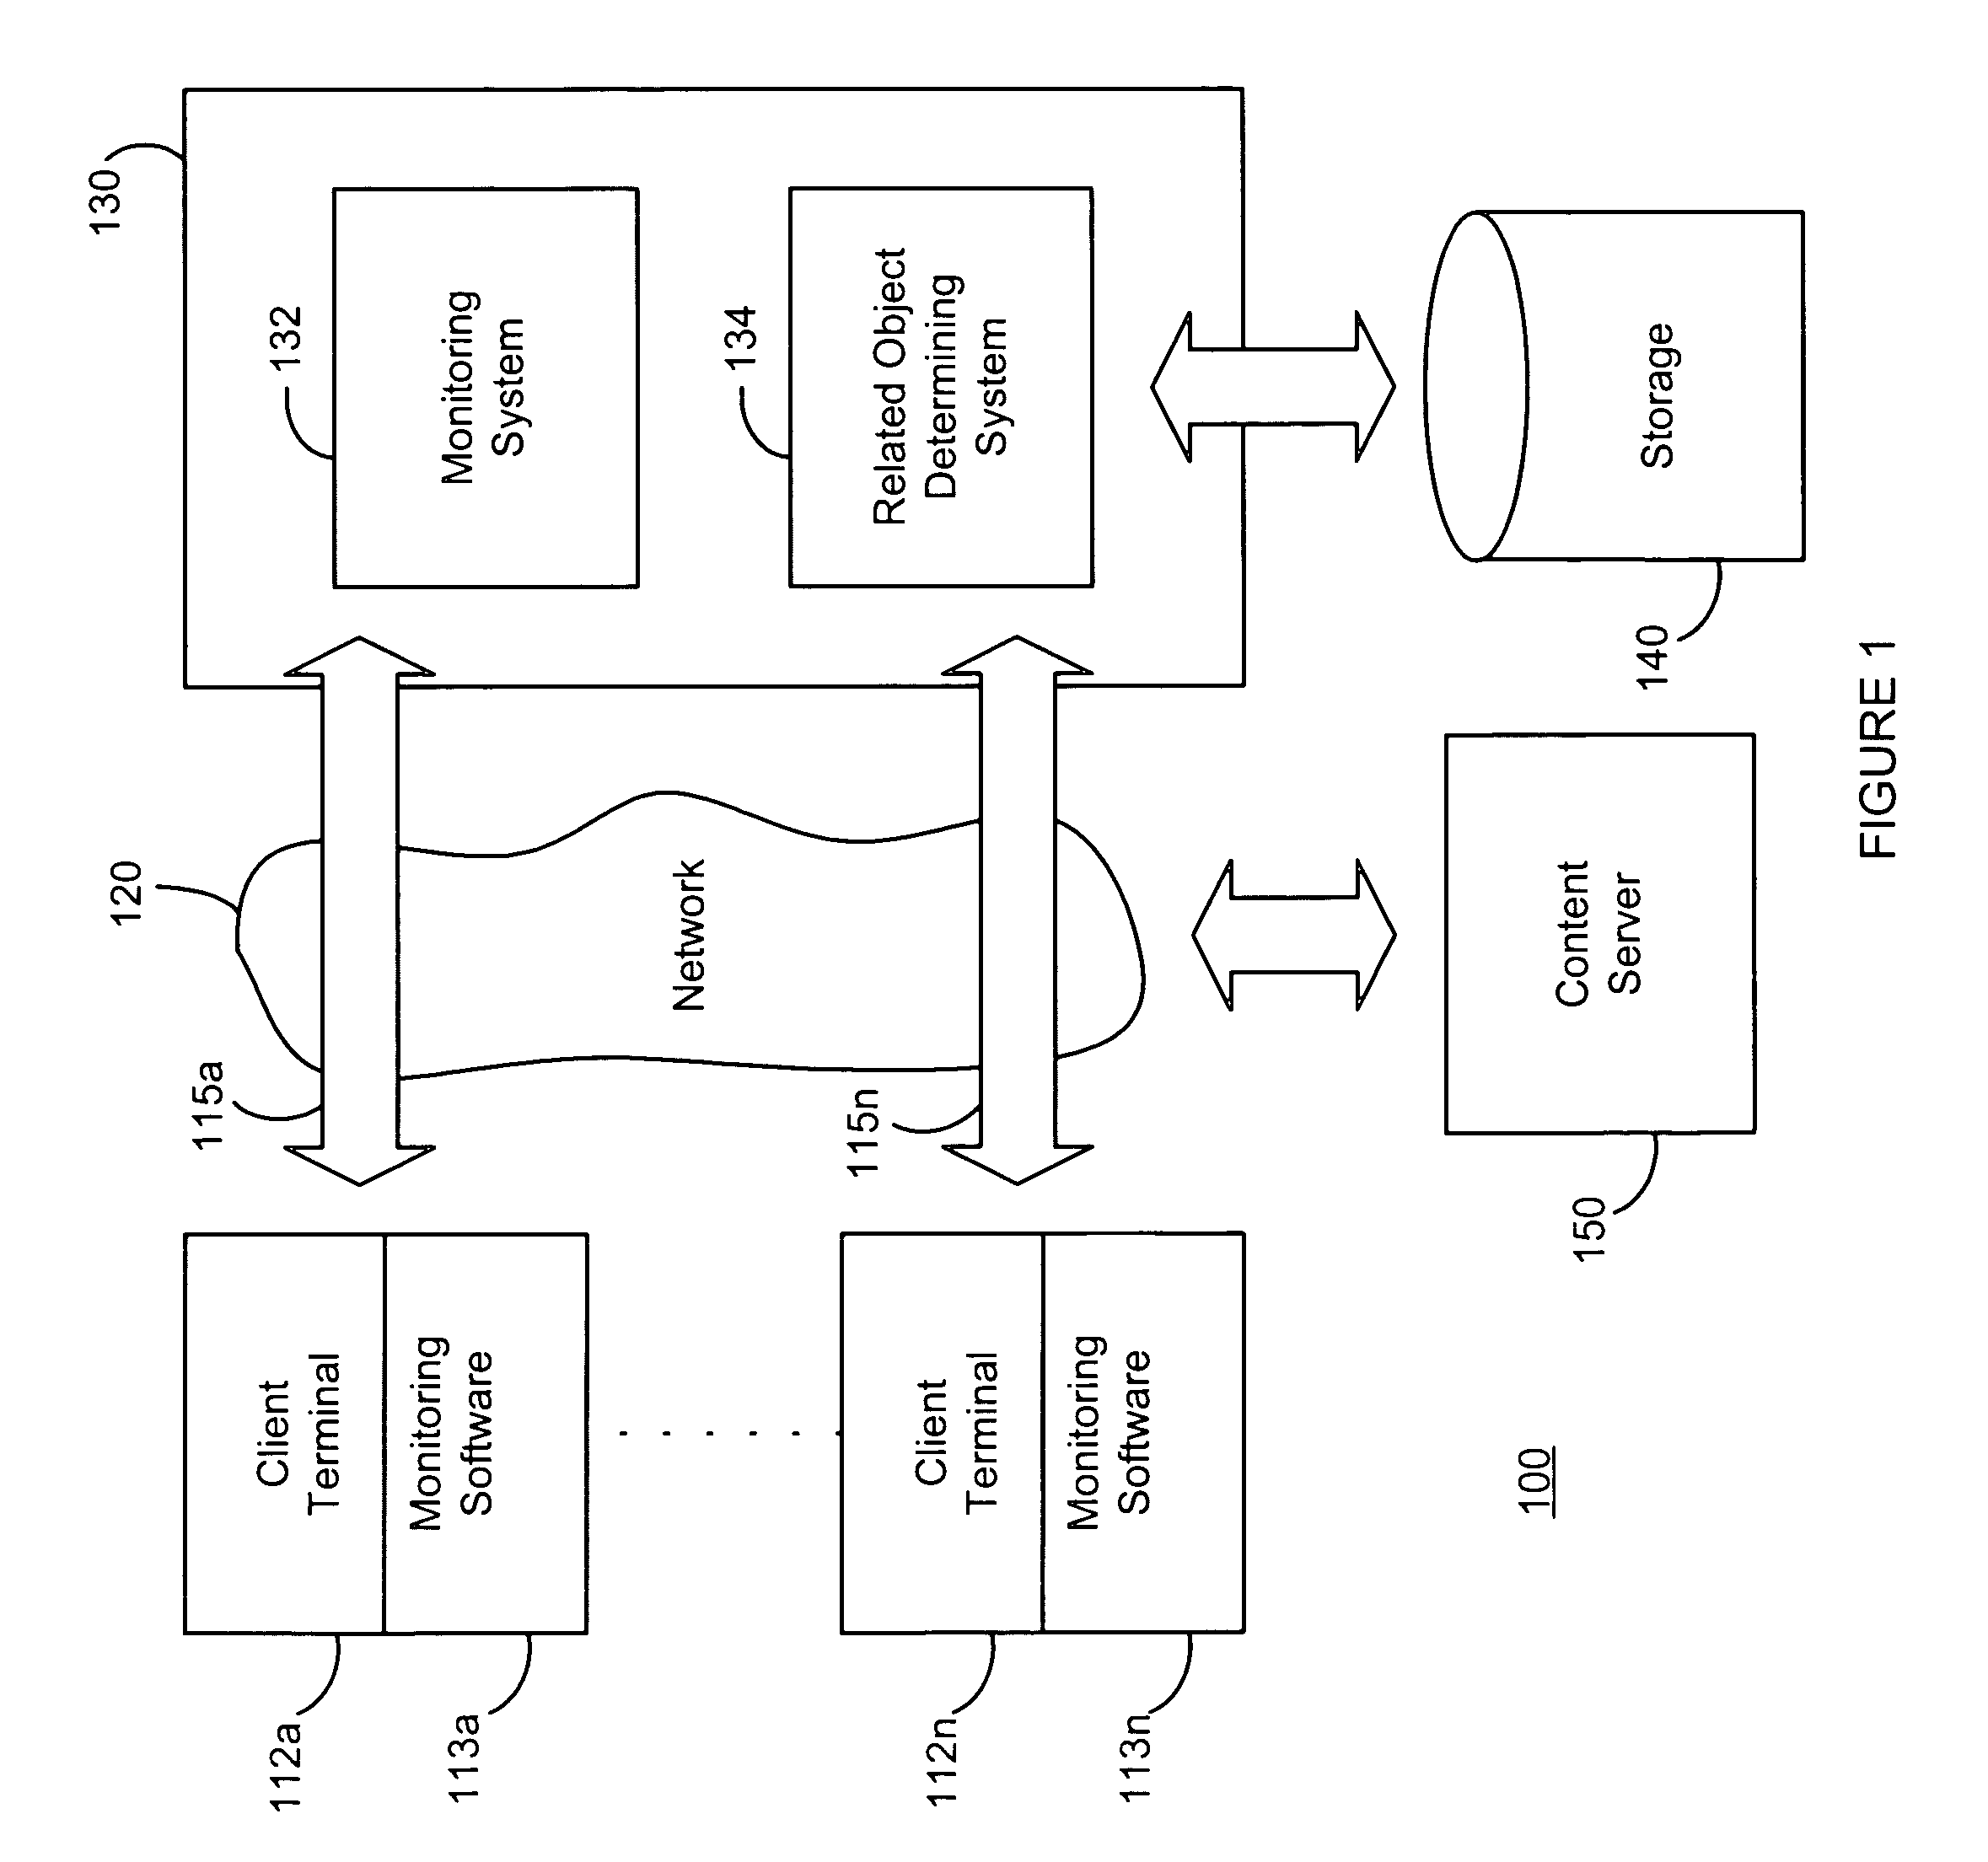 System and method of searching for providing dynamic search results with temporary visual display